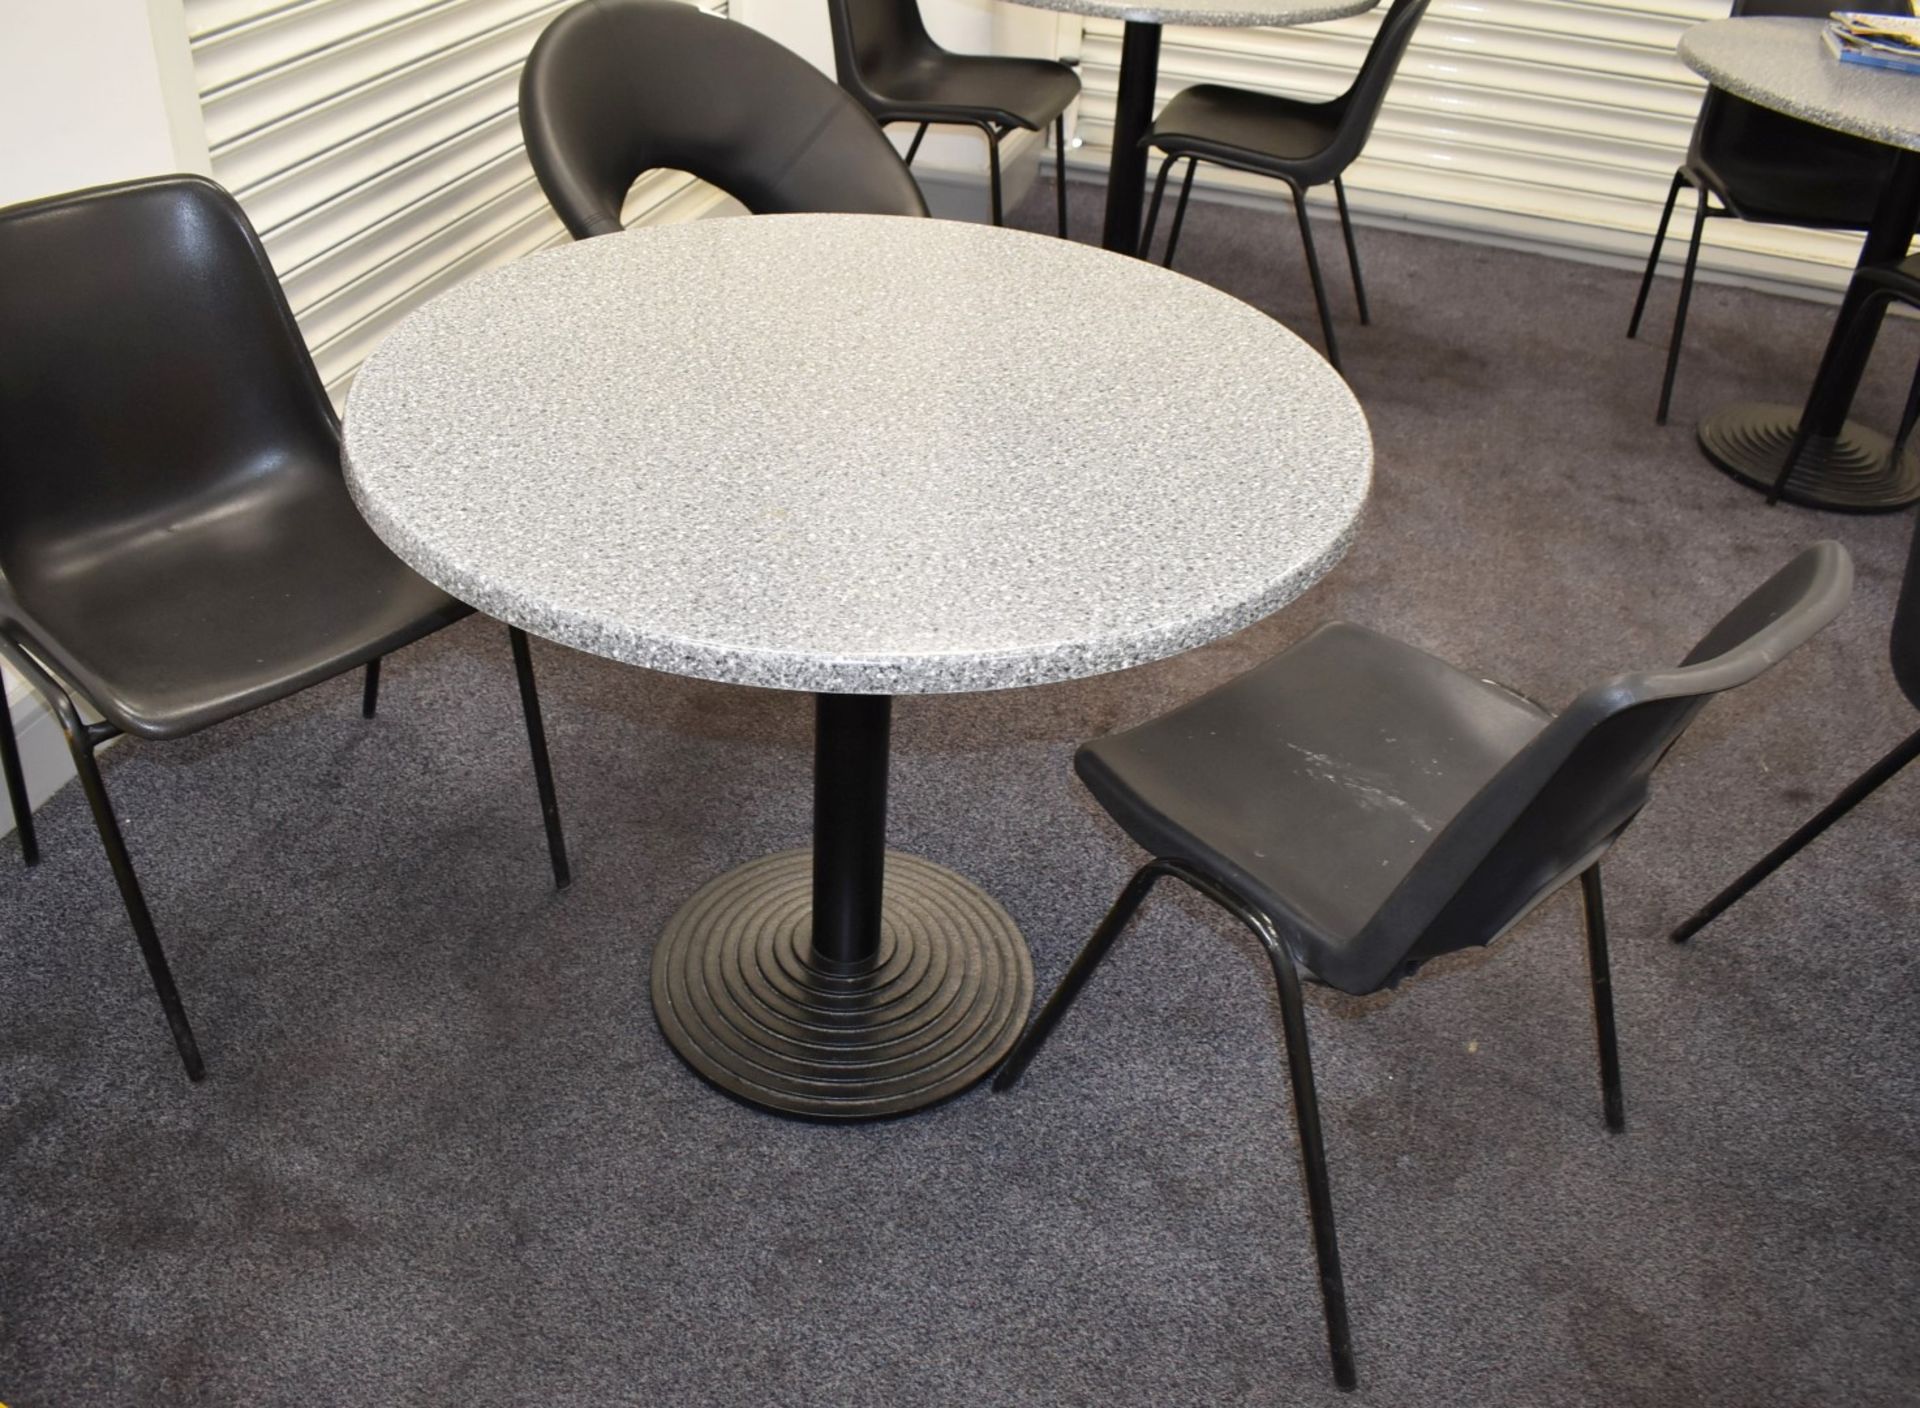 4 x Canteen Tables and 8 x Stackable Chairs - Granite Effect 90cm Table Tops With Cast Iron - Image 2 of 6